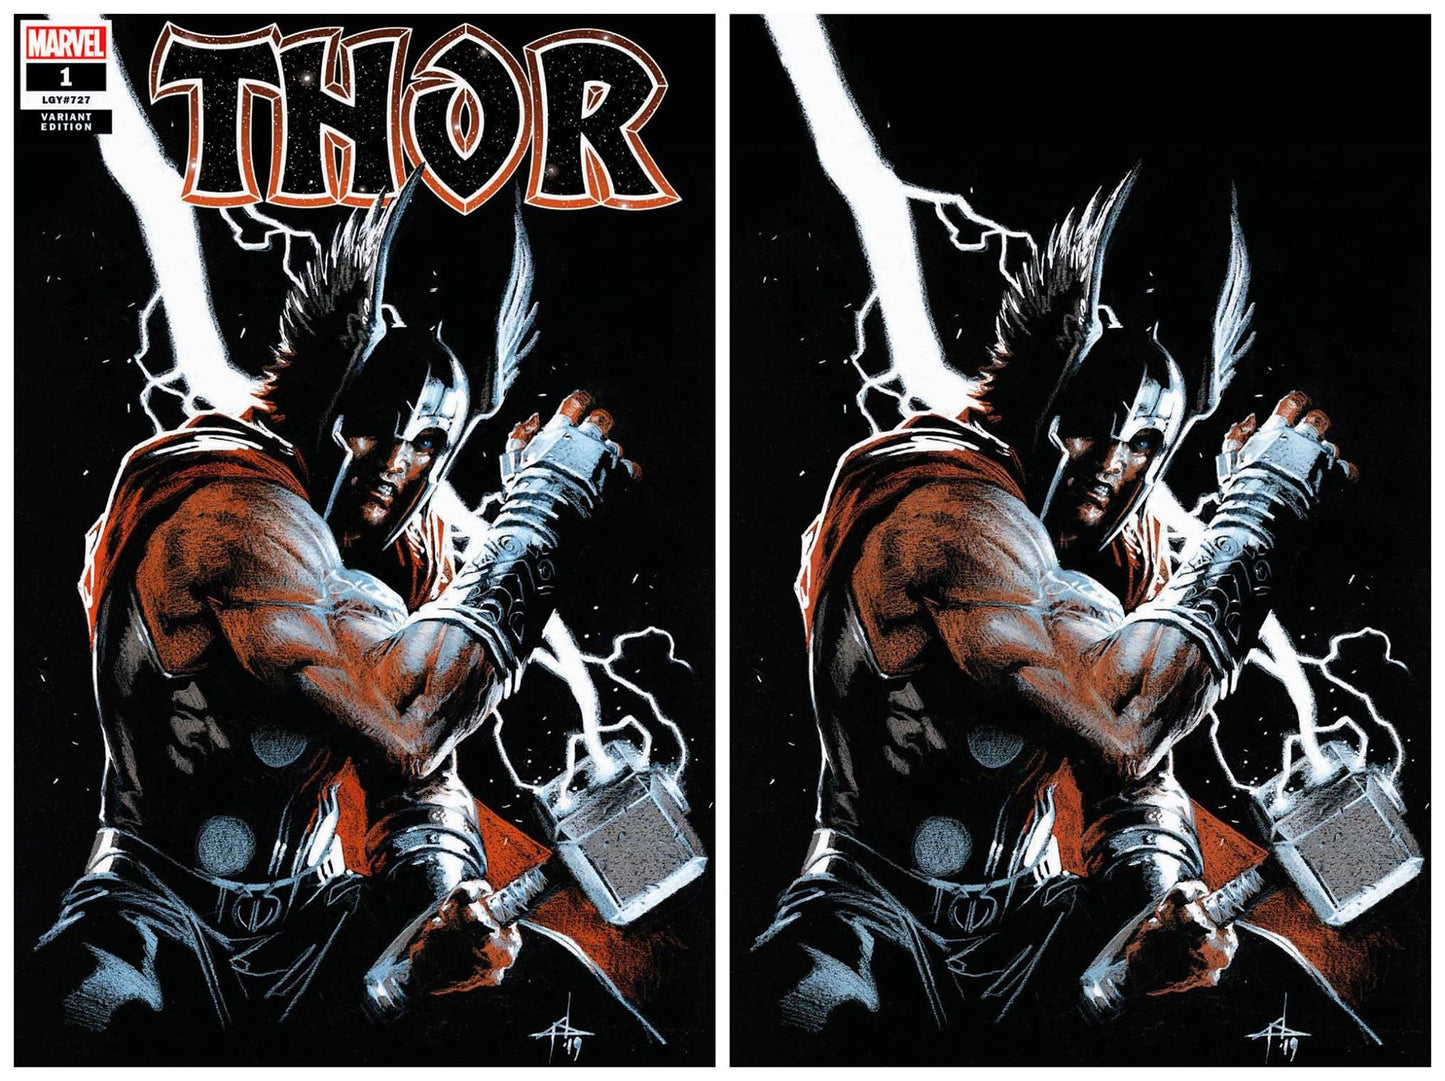 THOR #1 GABRIELE DELL'OTTO TRADE/VIRGIN VARIANT SET LIMITED TO 600 SETS WITH NUMBERED COA